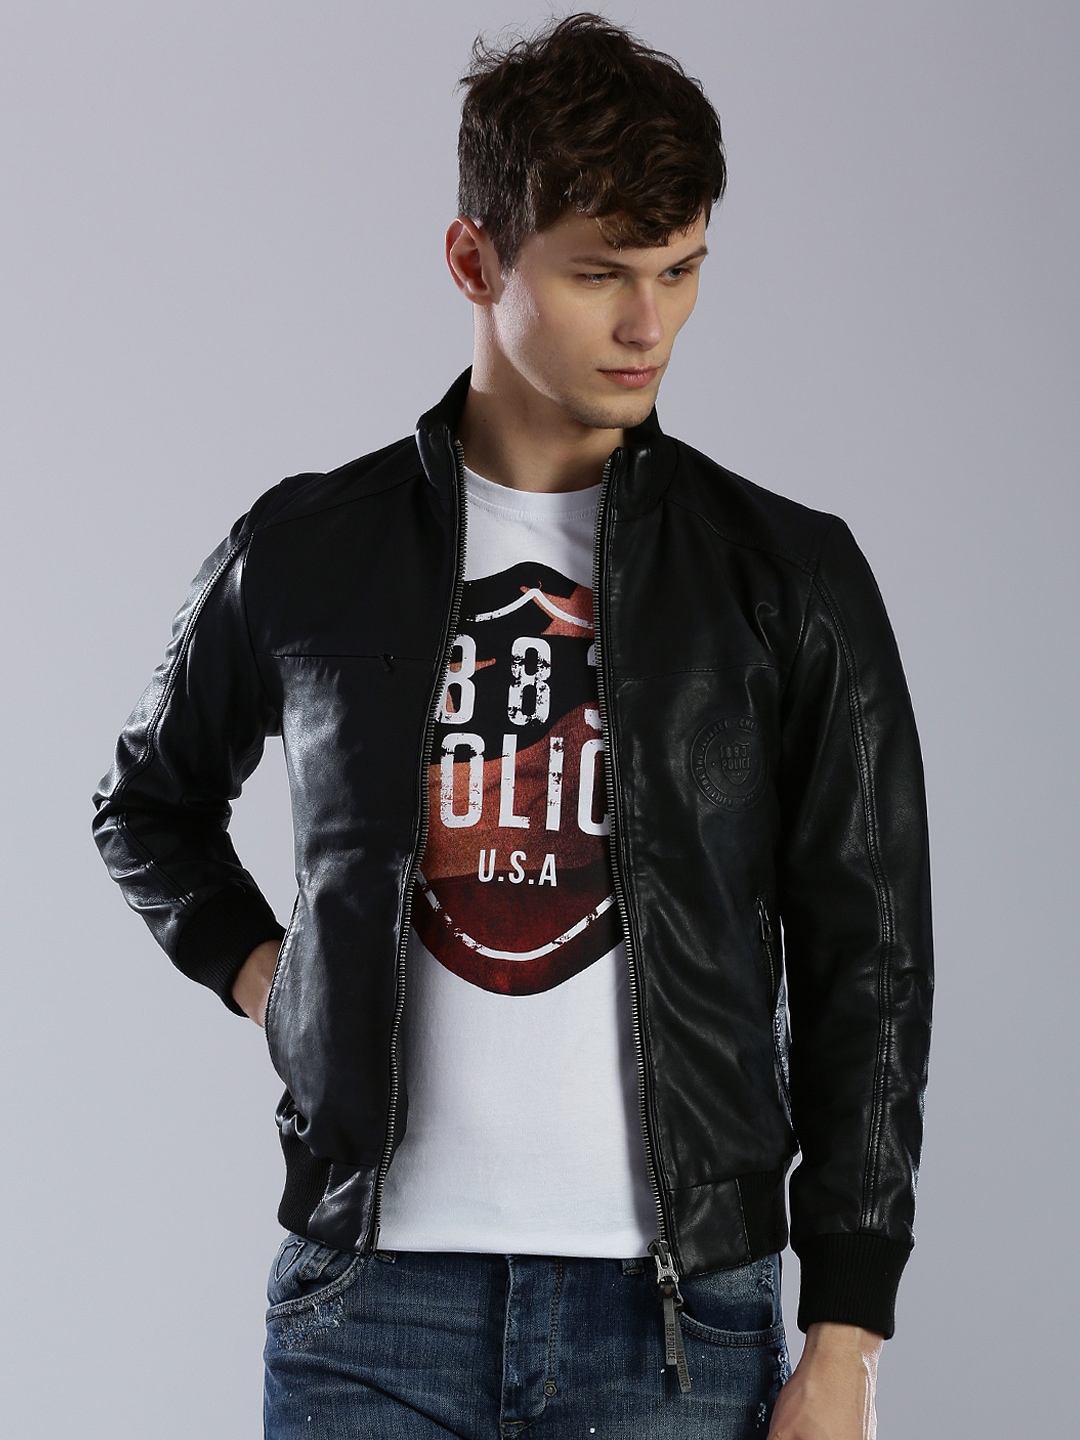 883 Police Black Leather Jacket price Myntra. Jackets Deals at Myntra ...